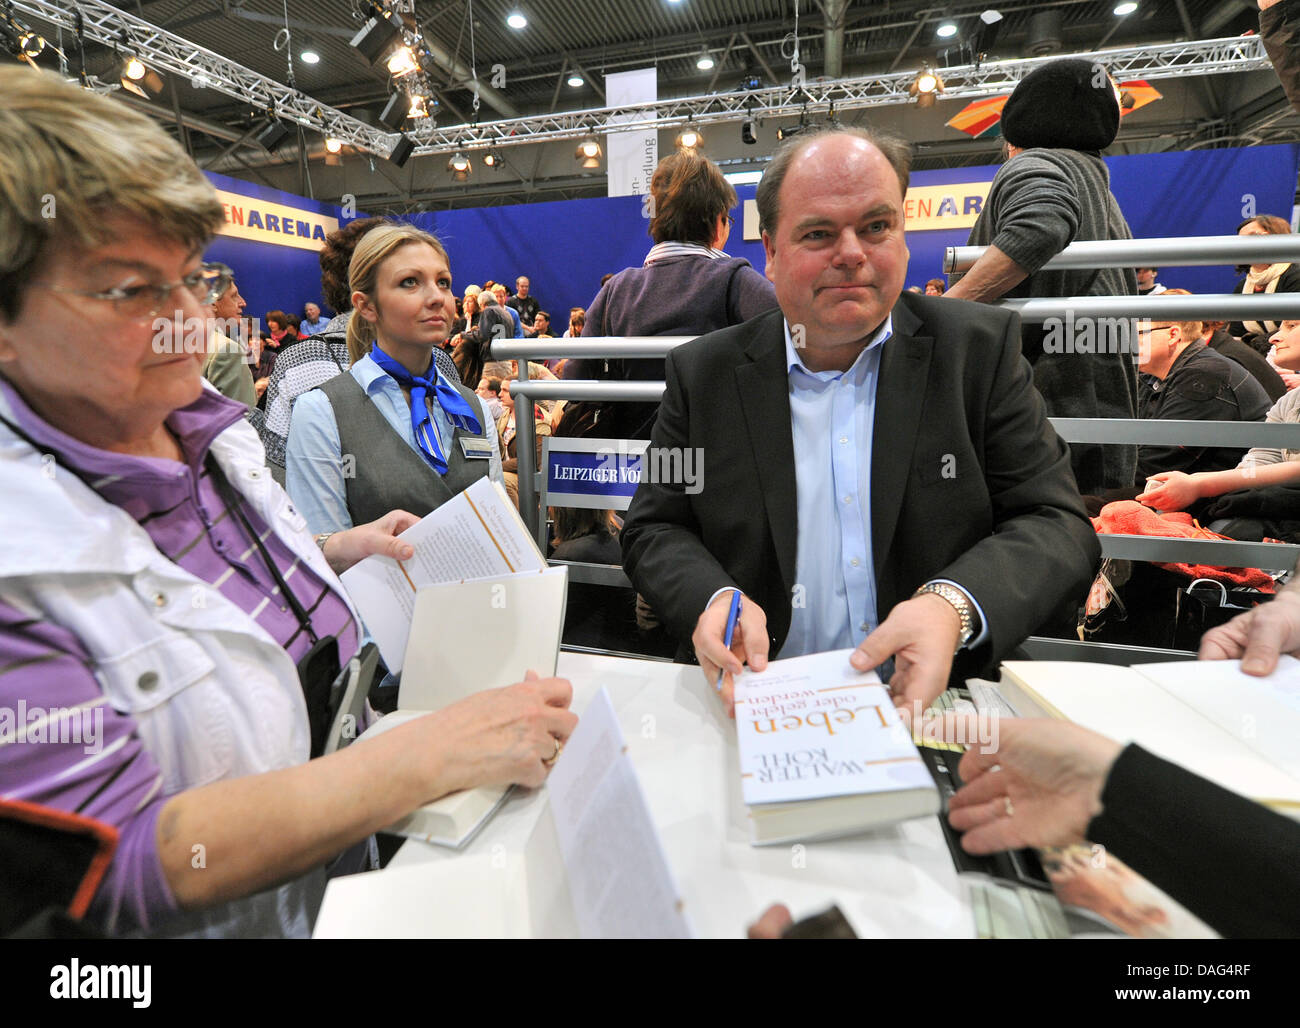 Walter Kohl, son of former German chancellor Helmut Kohl, presents his autobiography 'Live of Be Lived' at the Leipzig Book Fair 2011 in Leipzig, Germany, 18 March 2011. Photo: HEDNRIK SCHMIDT Stock Photo